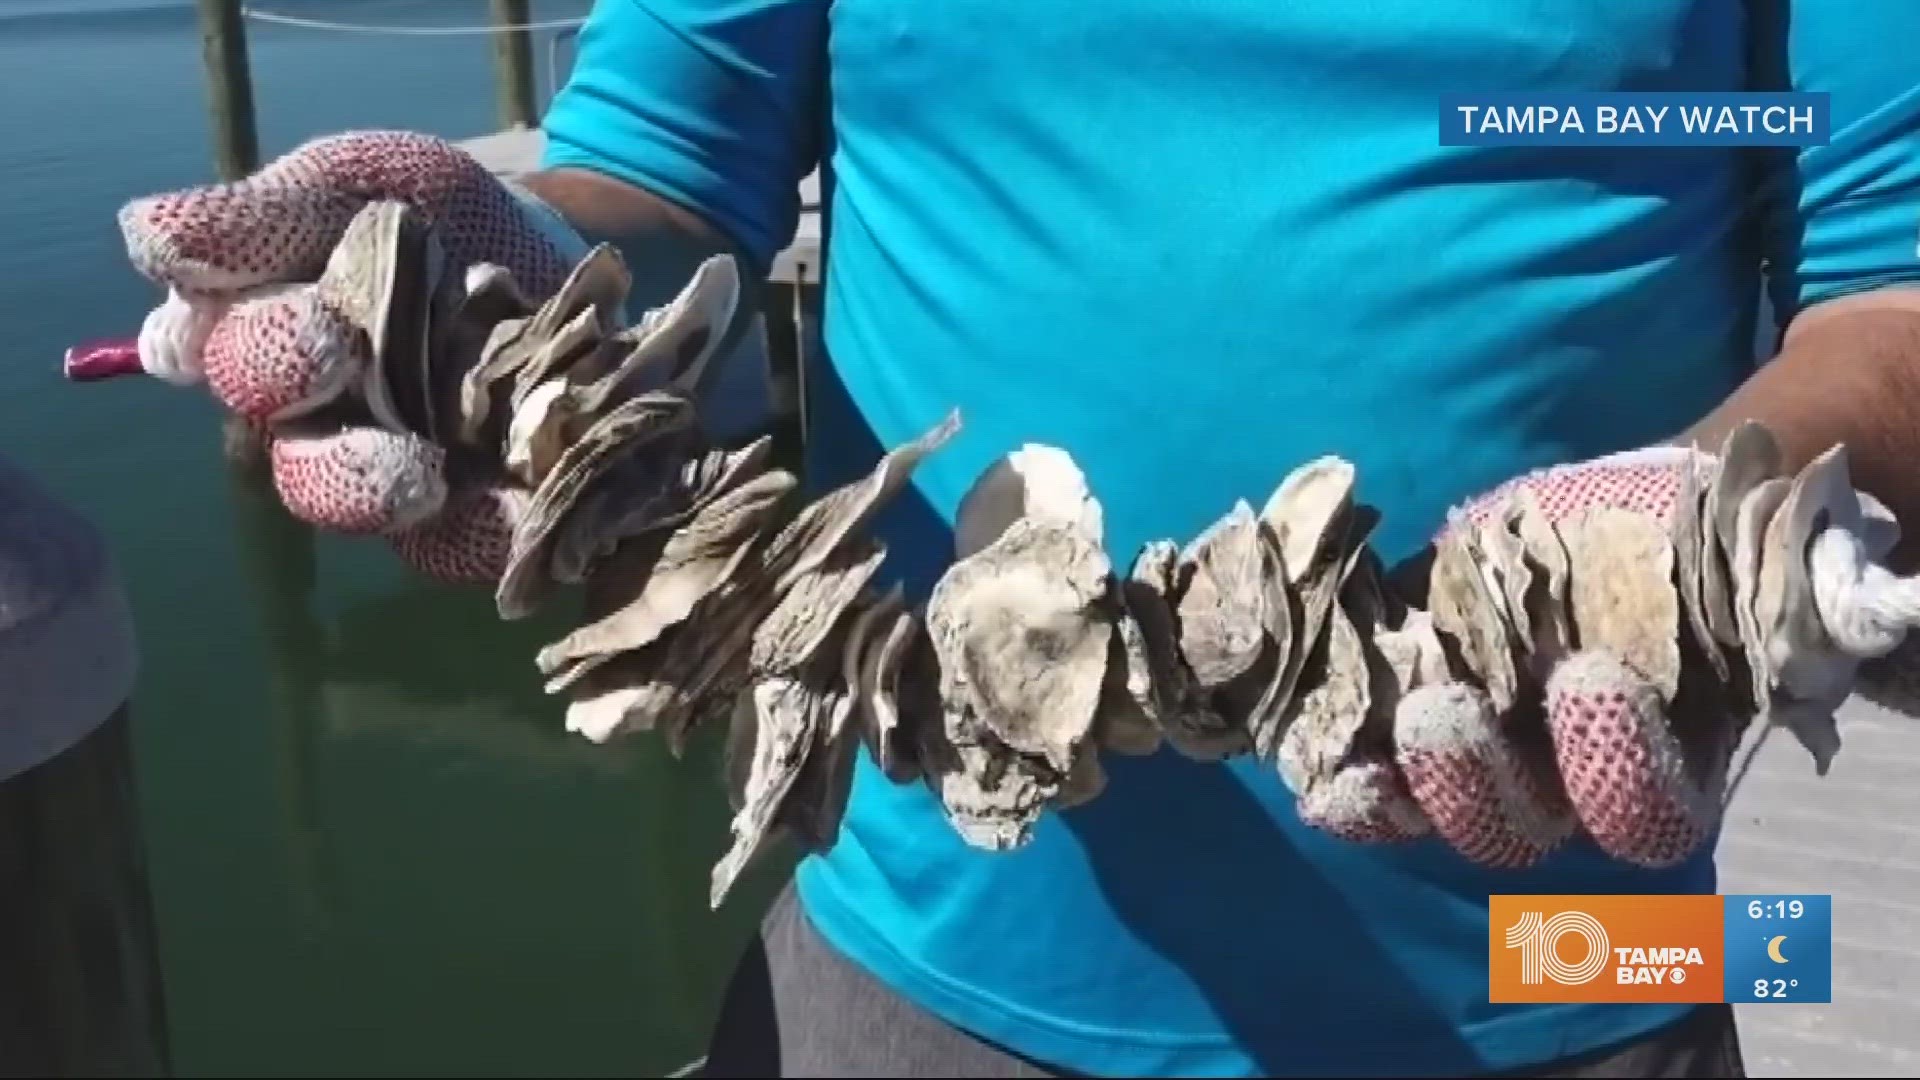 According to Tampa Bay Watch, more oysters mean a cleaner, healthier Tampa Bay.